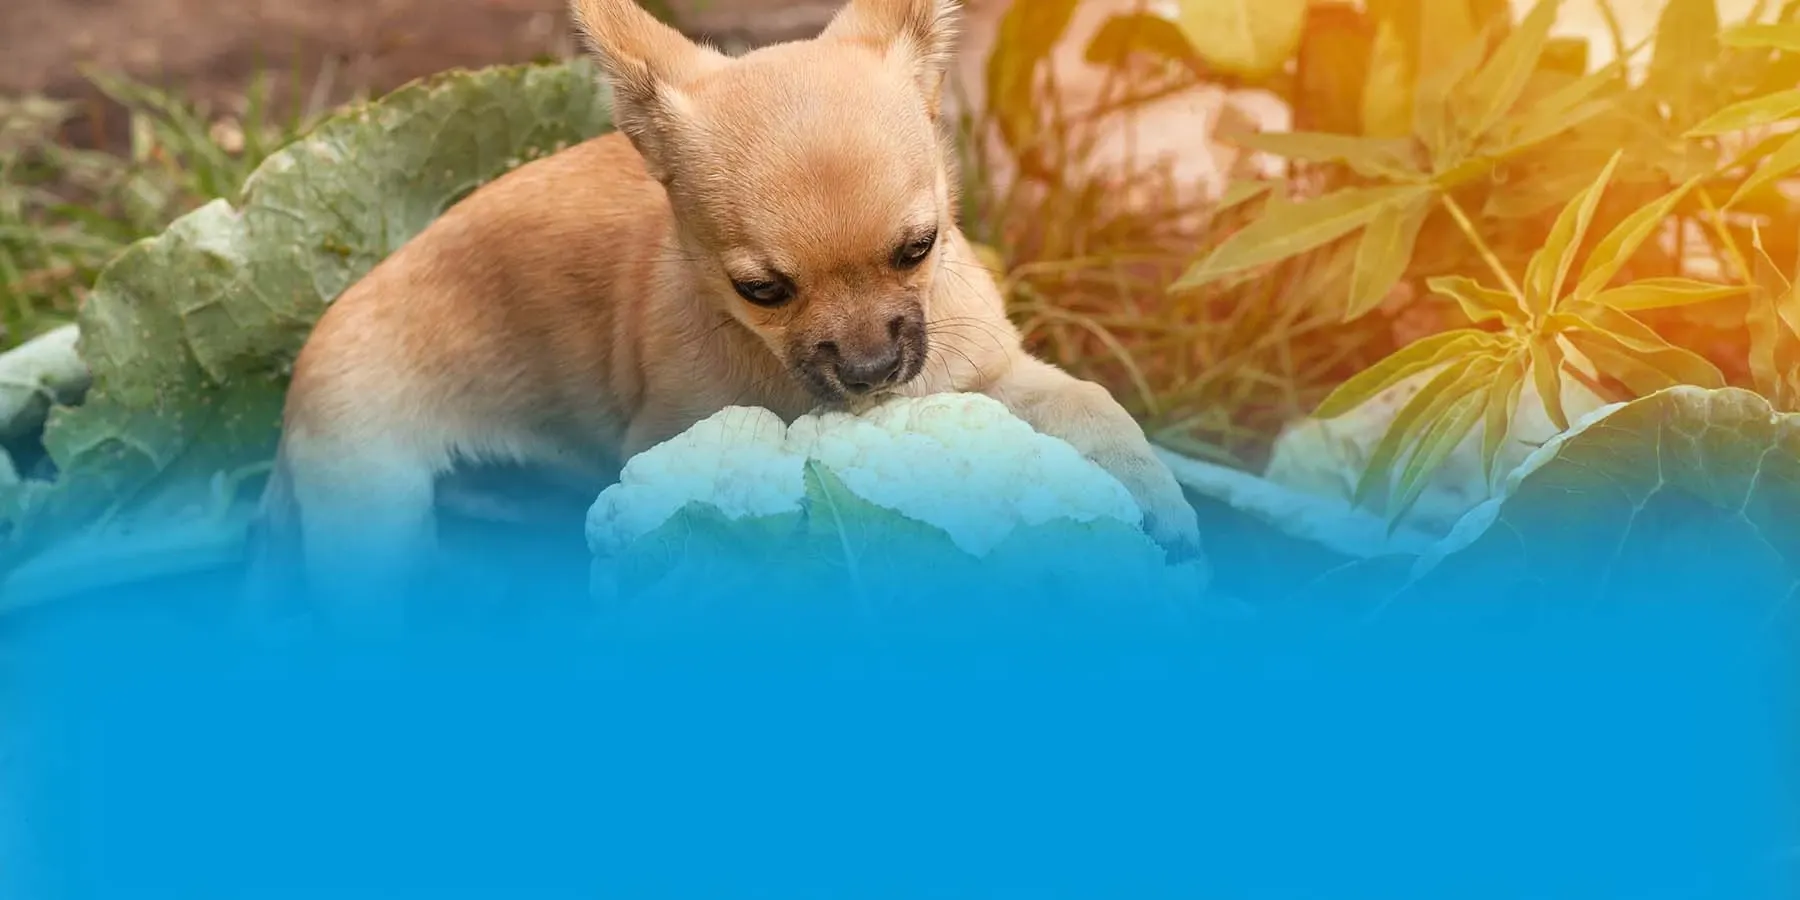 A Chihuahua puppy climbs on a head of cauliflower to inspect it.